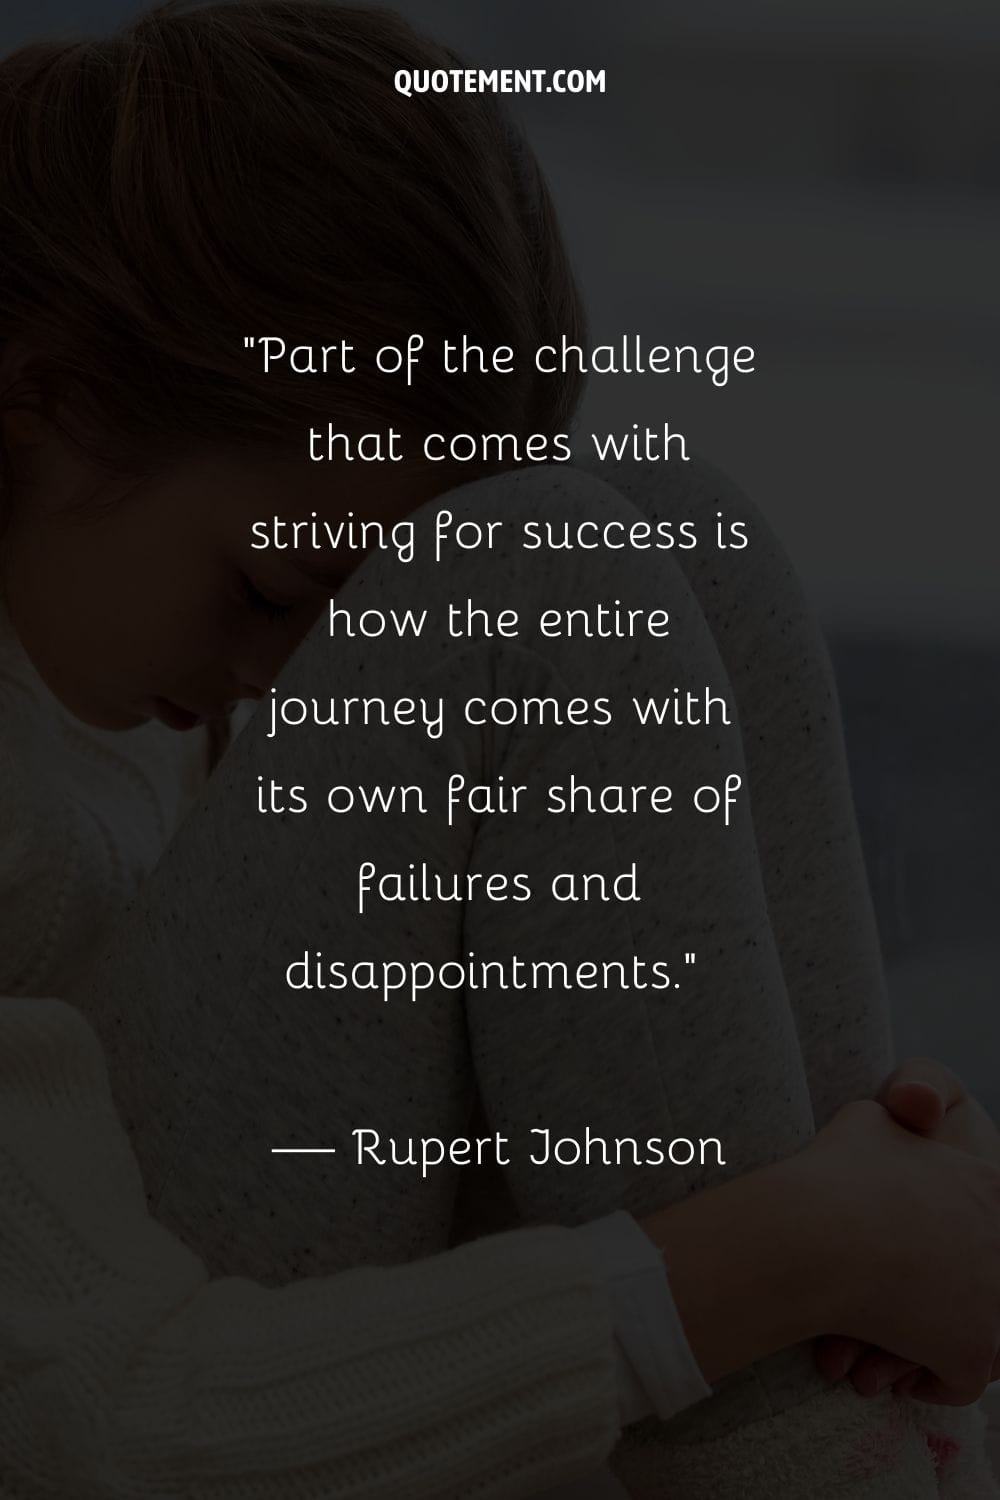 Part of the challenge that comes with striving for success is how the entire journey comes with its own fair share of failures and disappointments